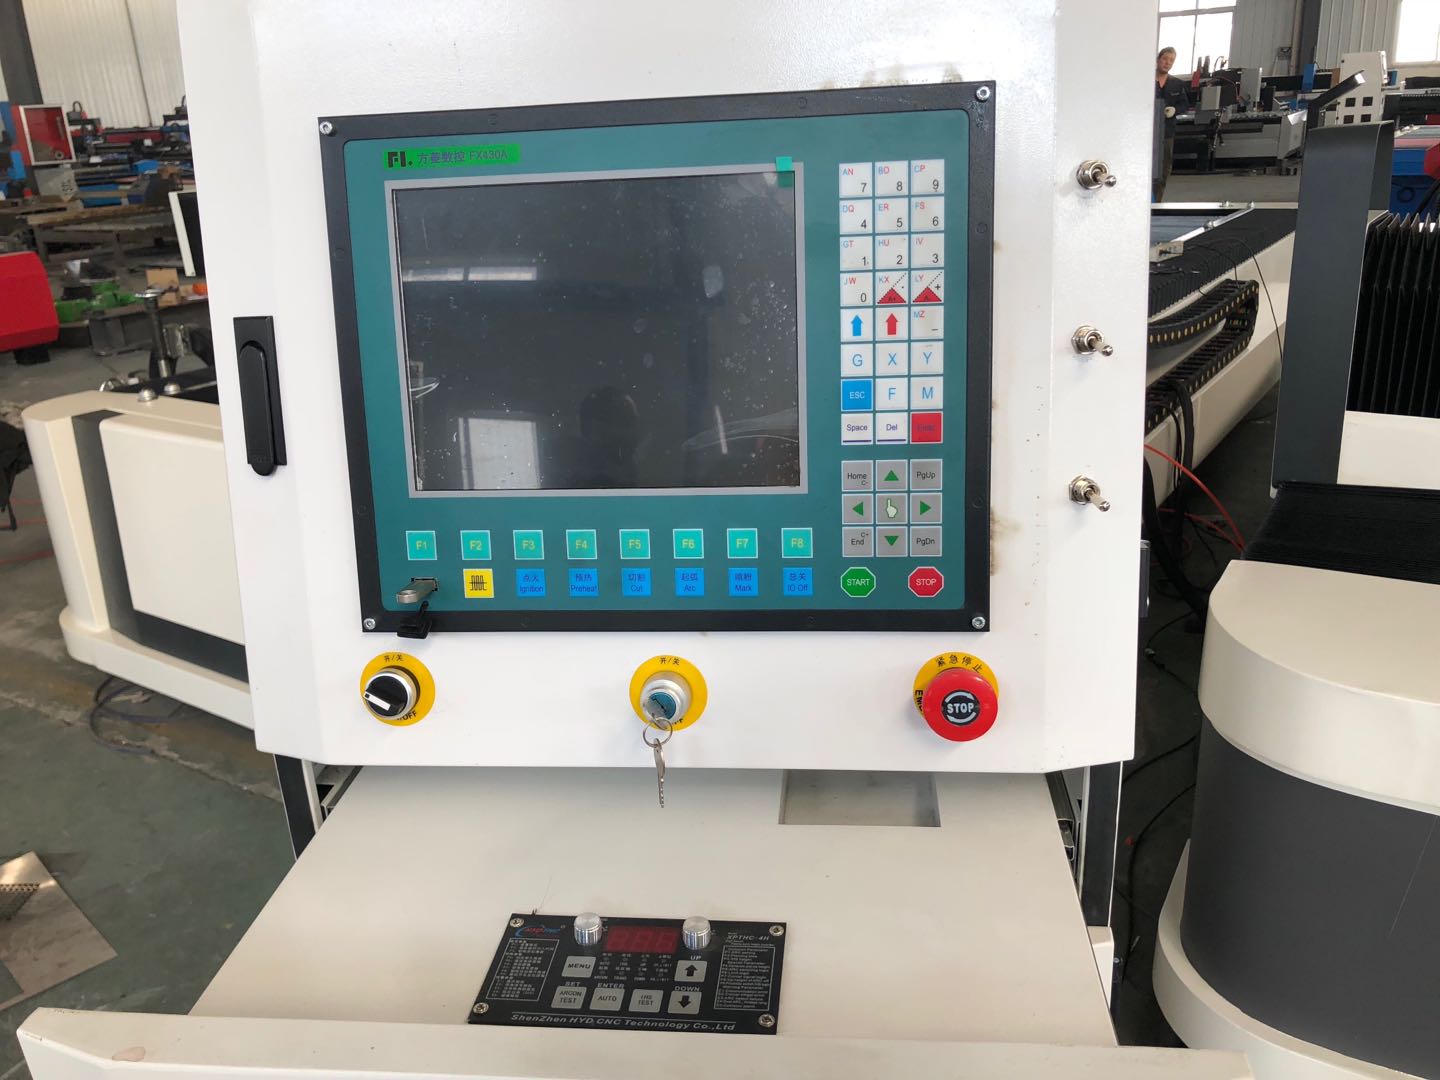 FX430A control system for plasma cutter